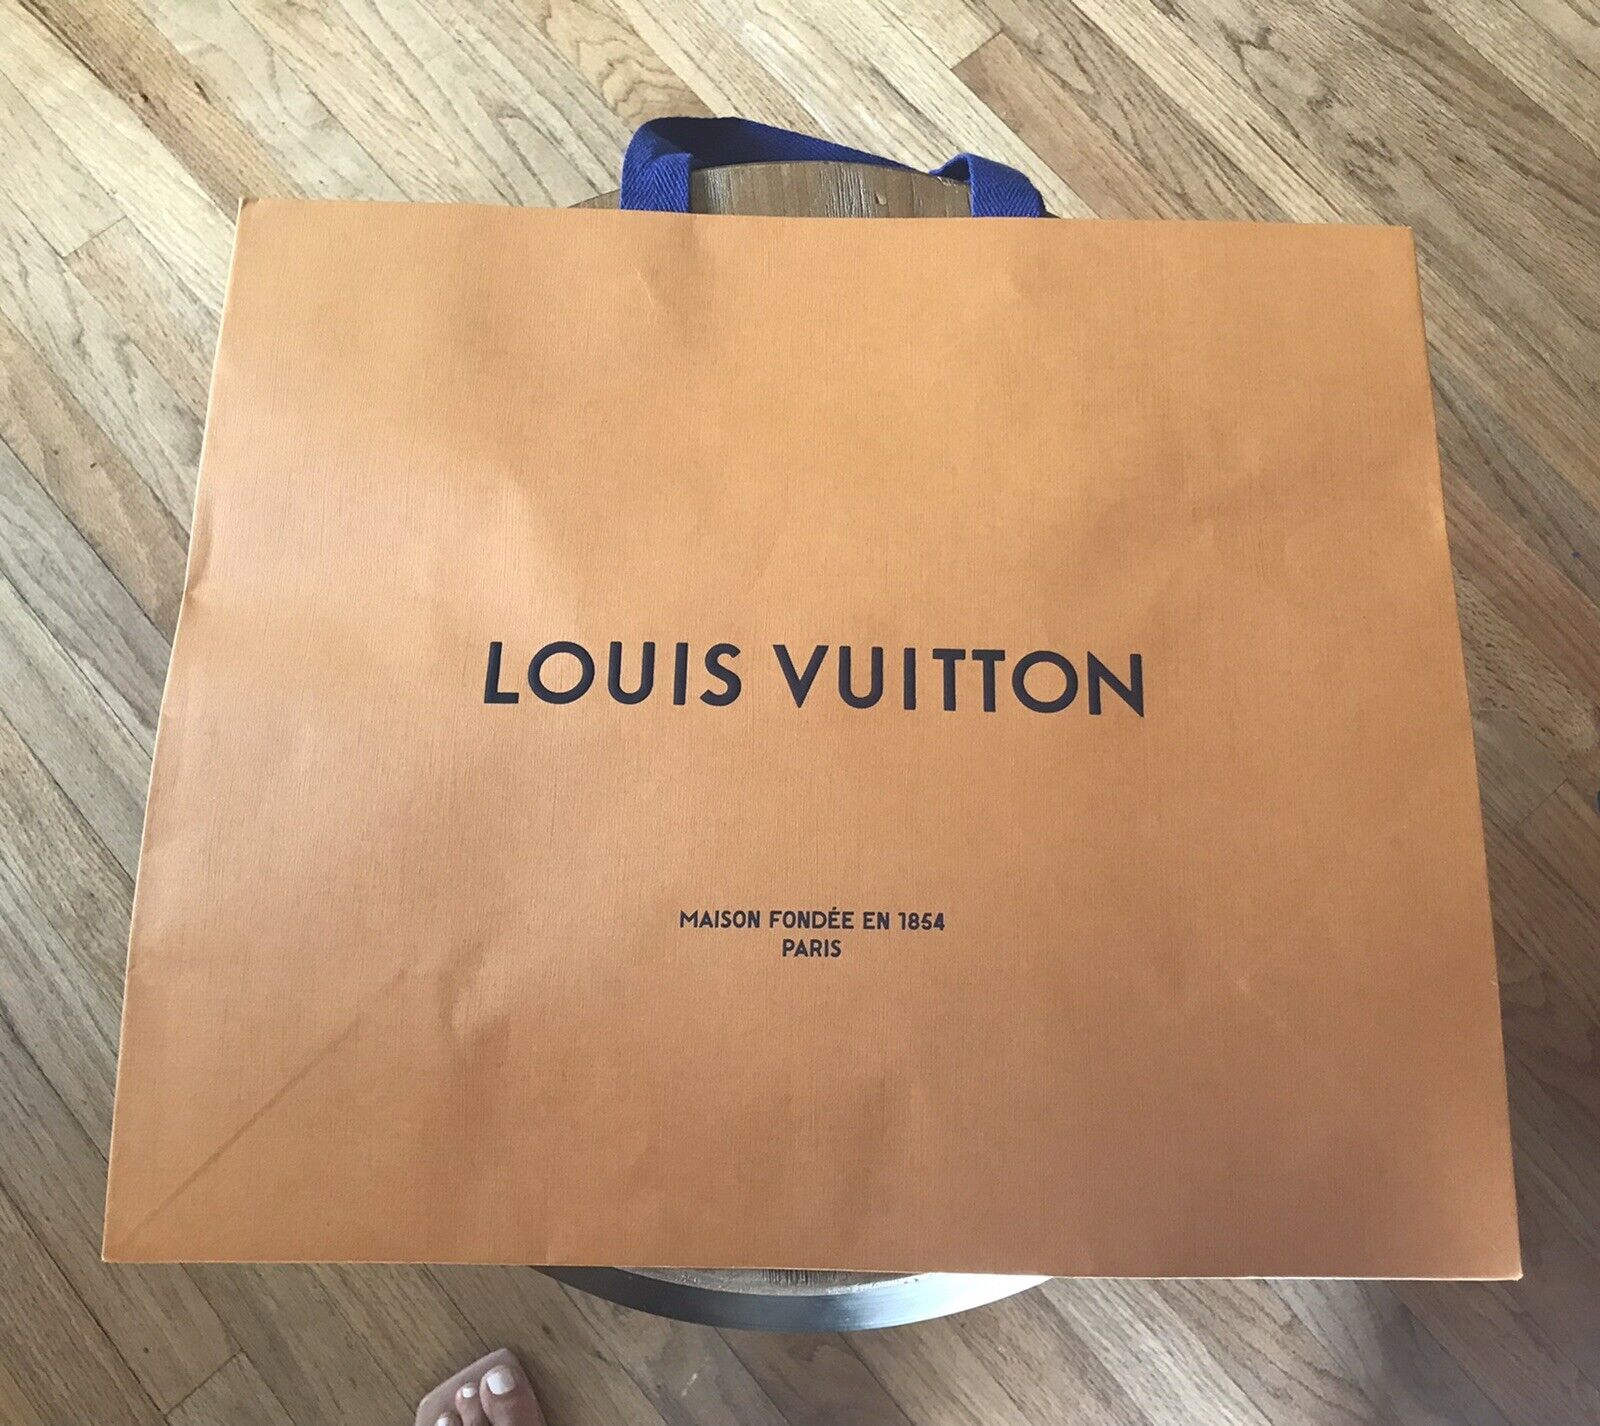 LOUIS VUITTON Authentic Paper Gift Shopping Bag LARGE SIZE 16” x13